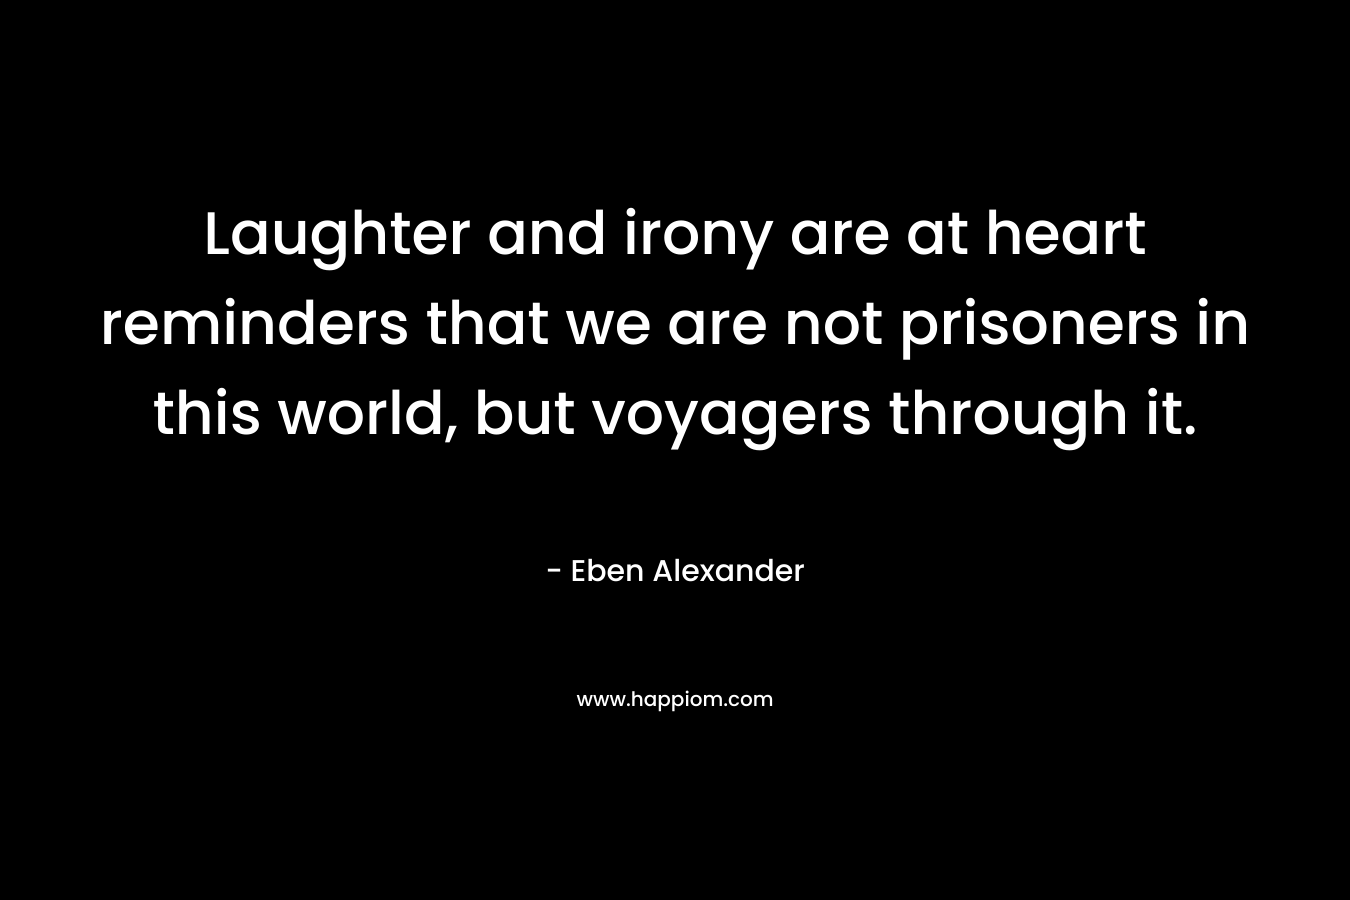 Laughter and irony are at heart reminders that we are not prisoners in this world, but voyagers through it. – Eben Alexander